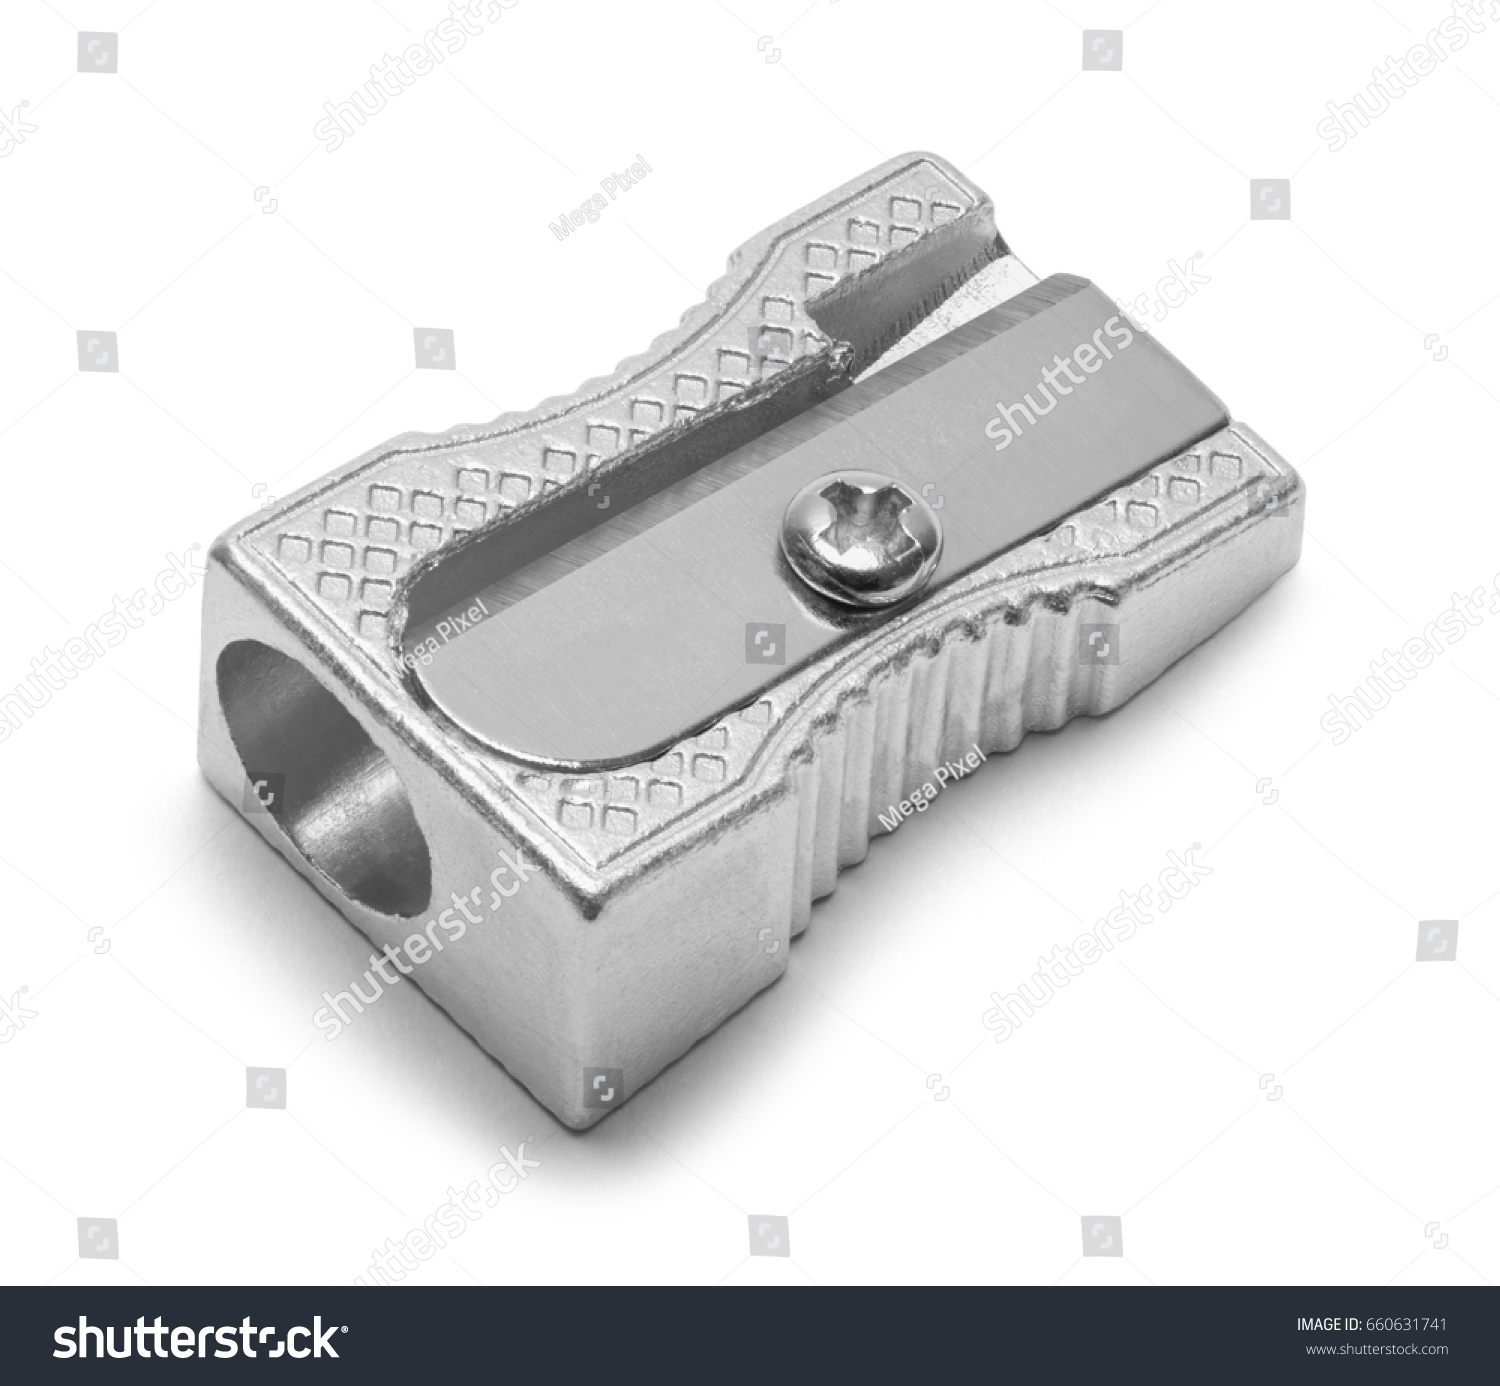 Metal Pencil Sharpener Isolated on White Background. #660631741